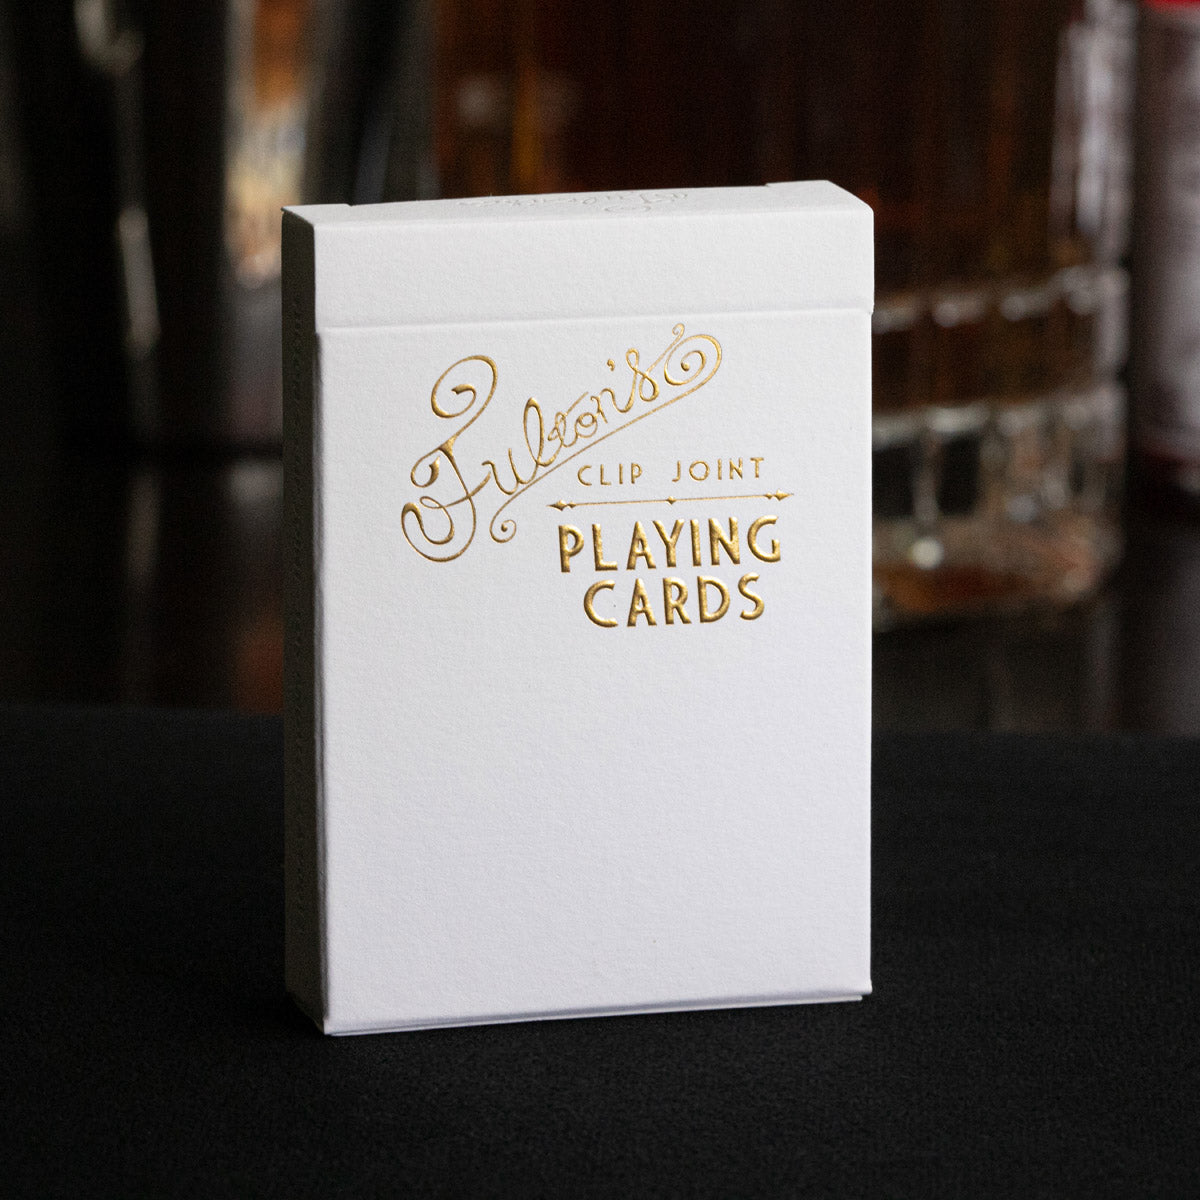 WHITE BOX LIMITED FULTON'S CLIP JOINT "10 YEAR" PLAYING CARDS